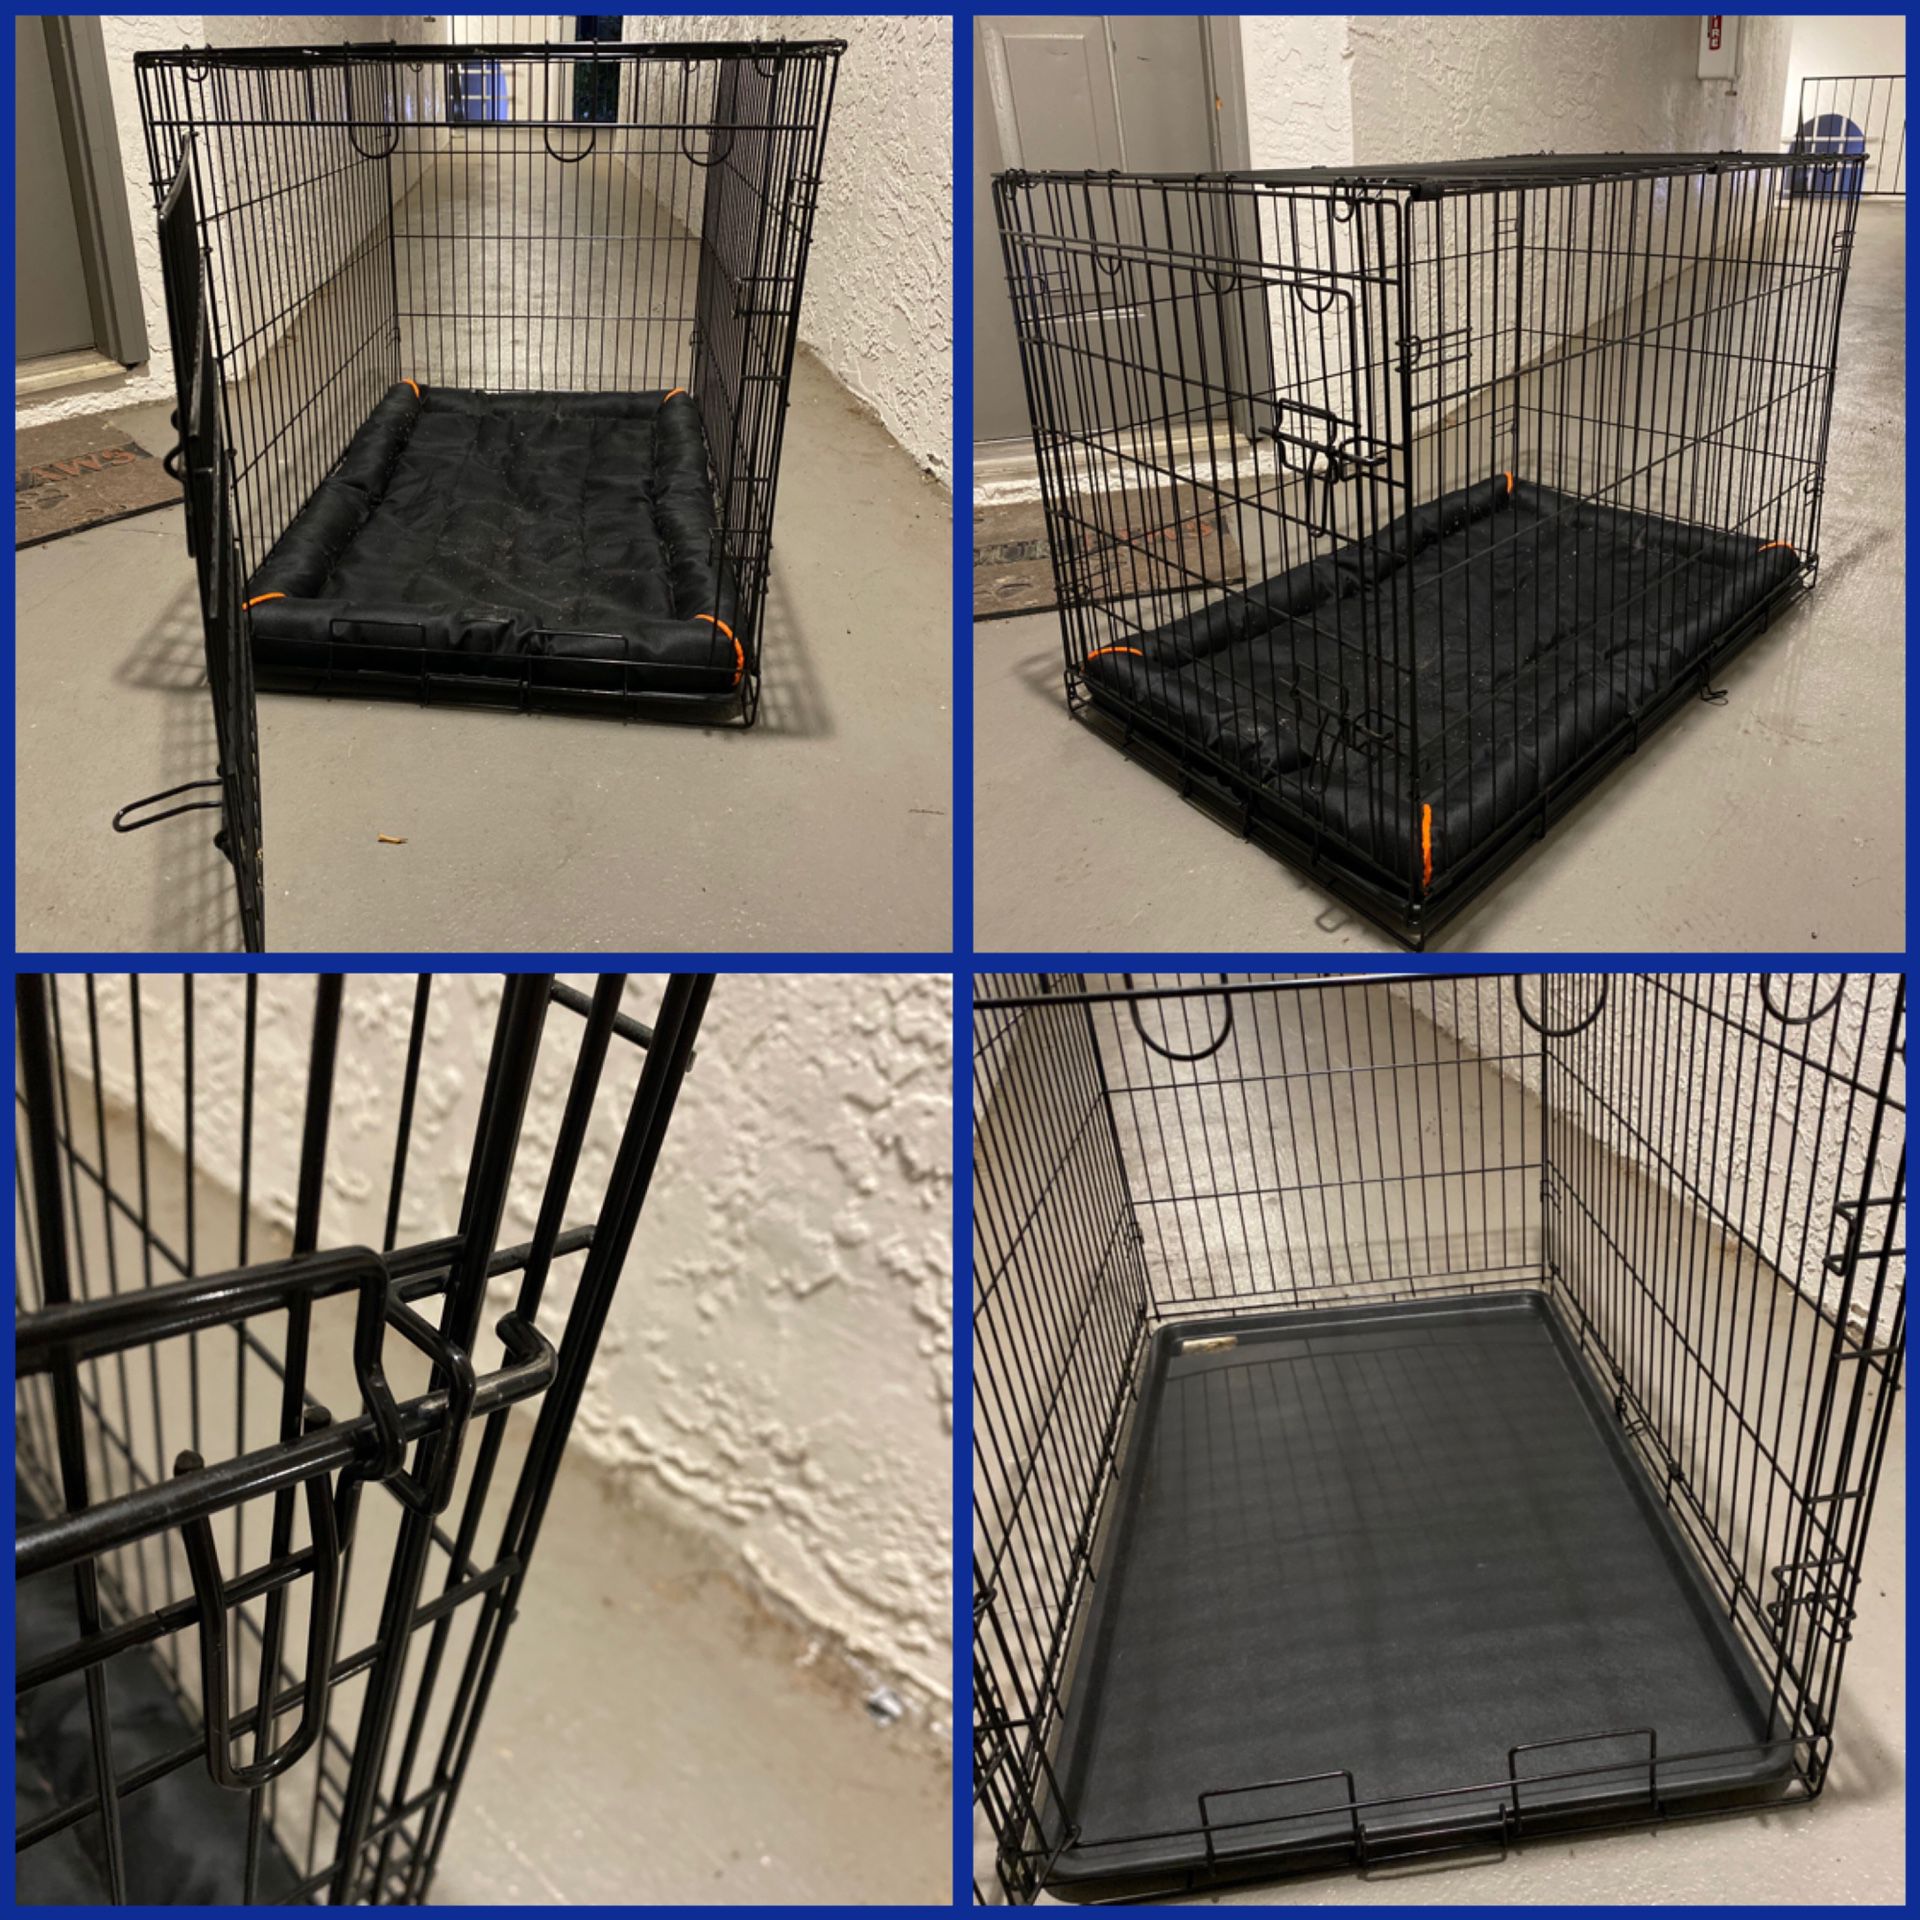 36” folding wire crate